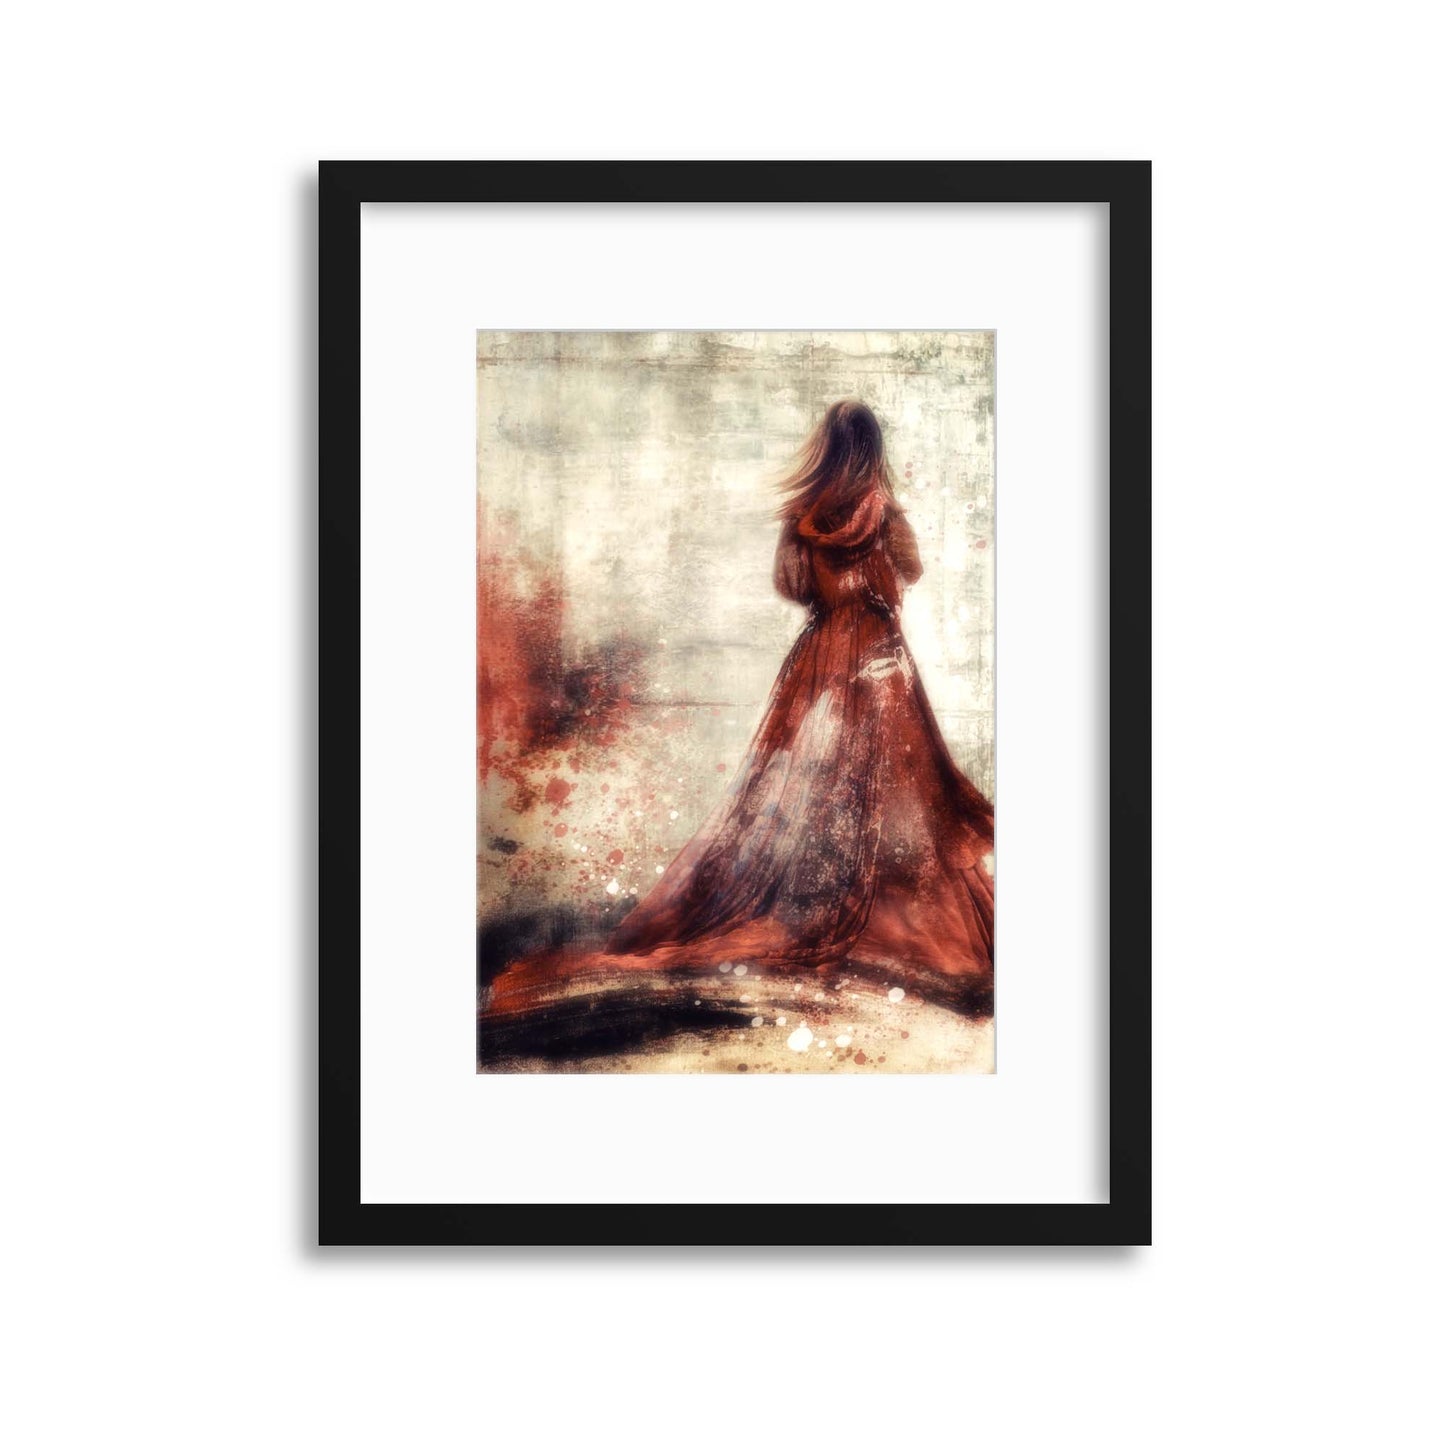 She'll Wear the Red Dress by Charlaine Gerber Framed Print - USTAD HOME